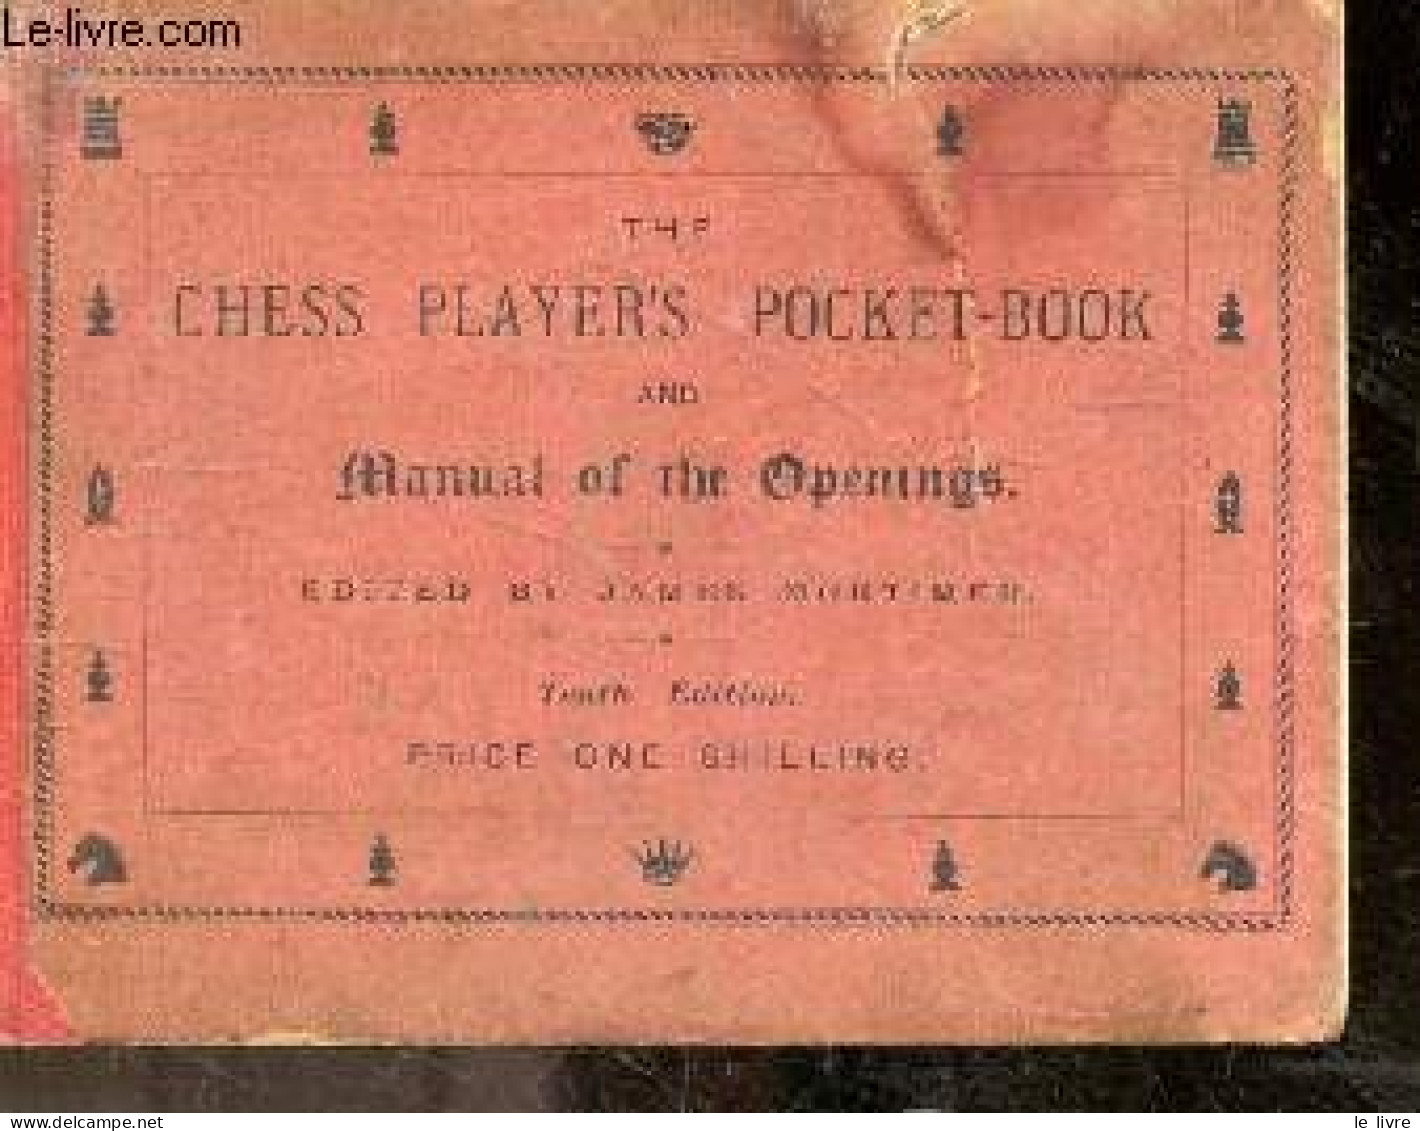 The Chess Player's Pocket Book And Manual Of The Openings - Tenth Edition - JAMES MORTIMER - 1893 - Lingueística